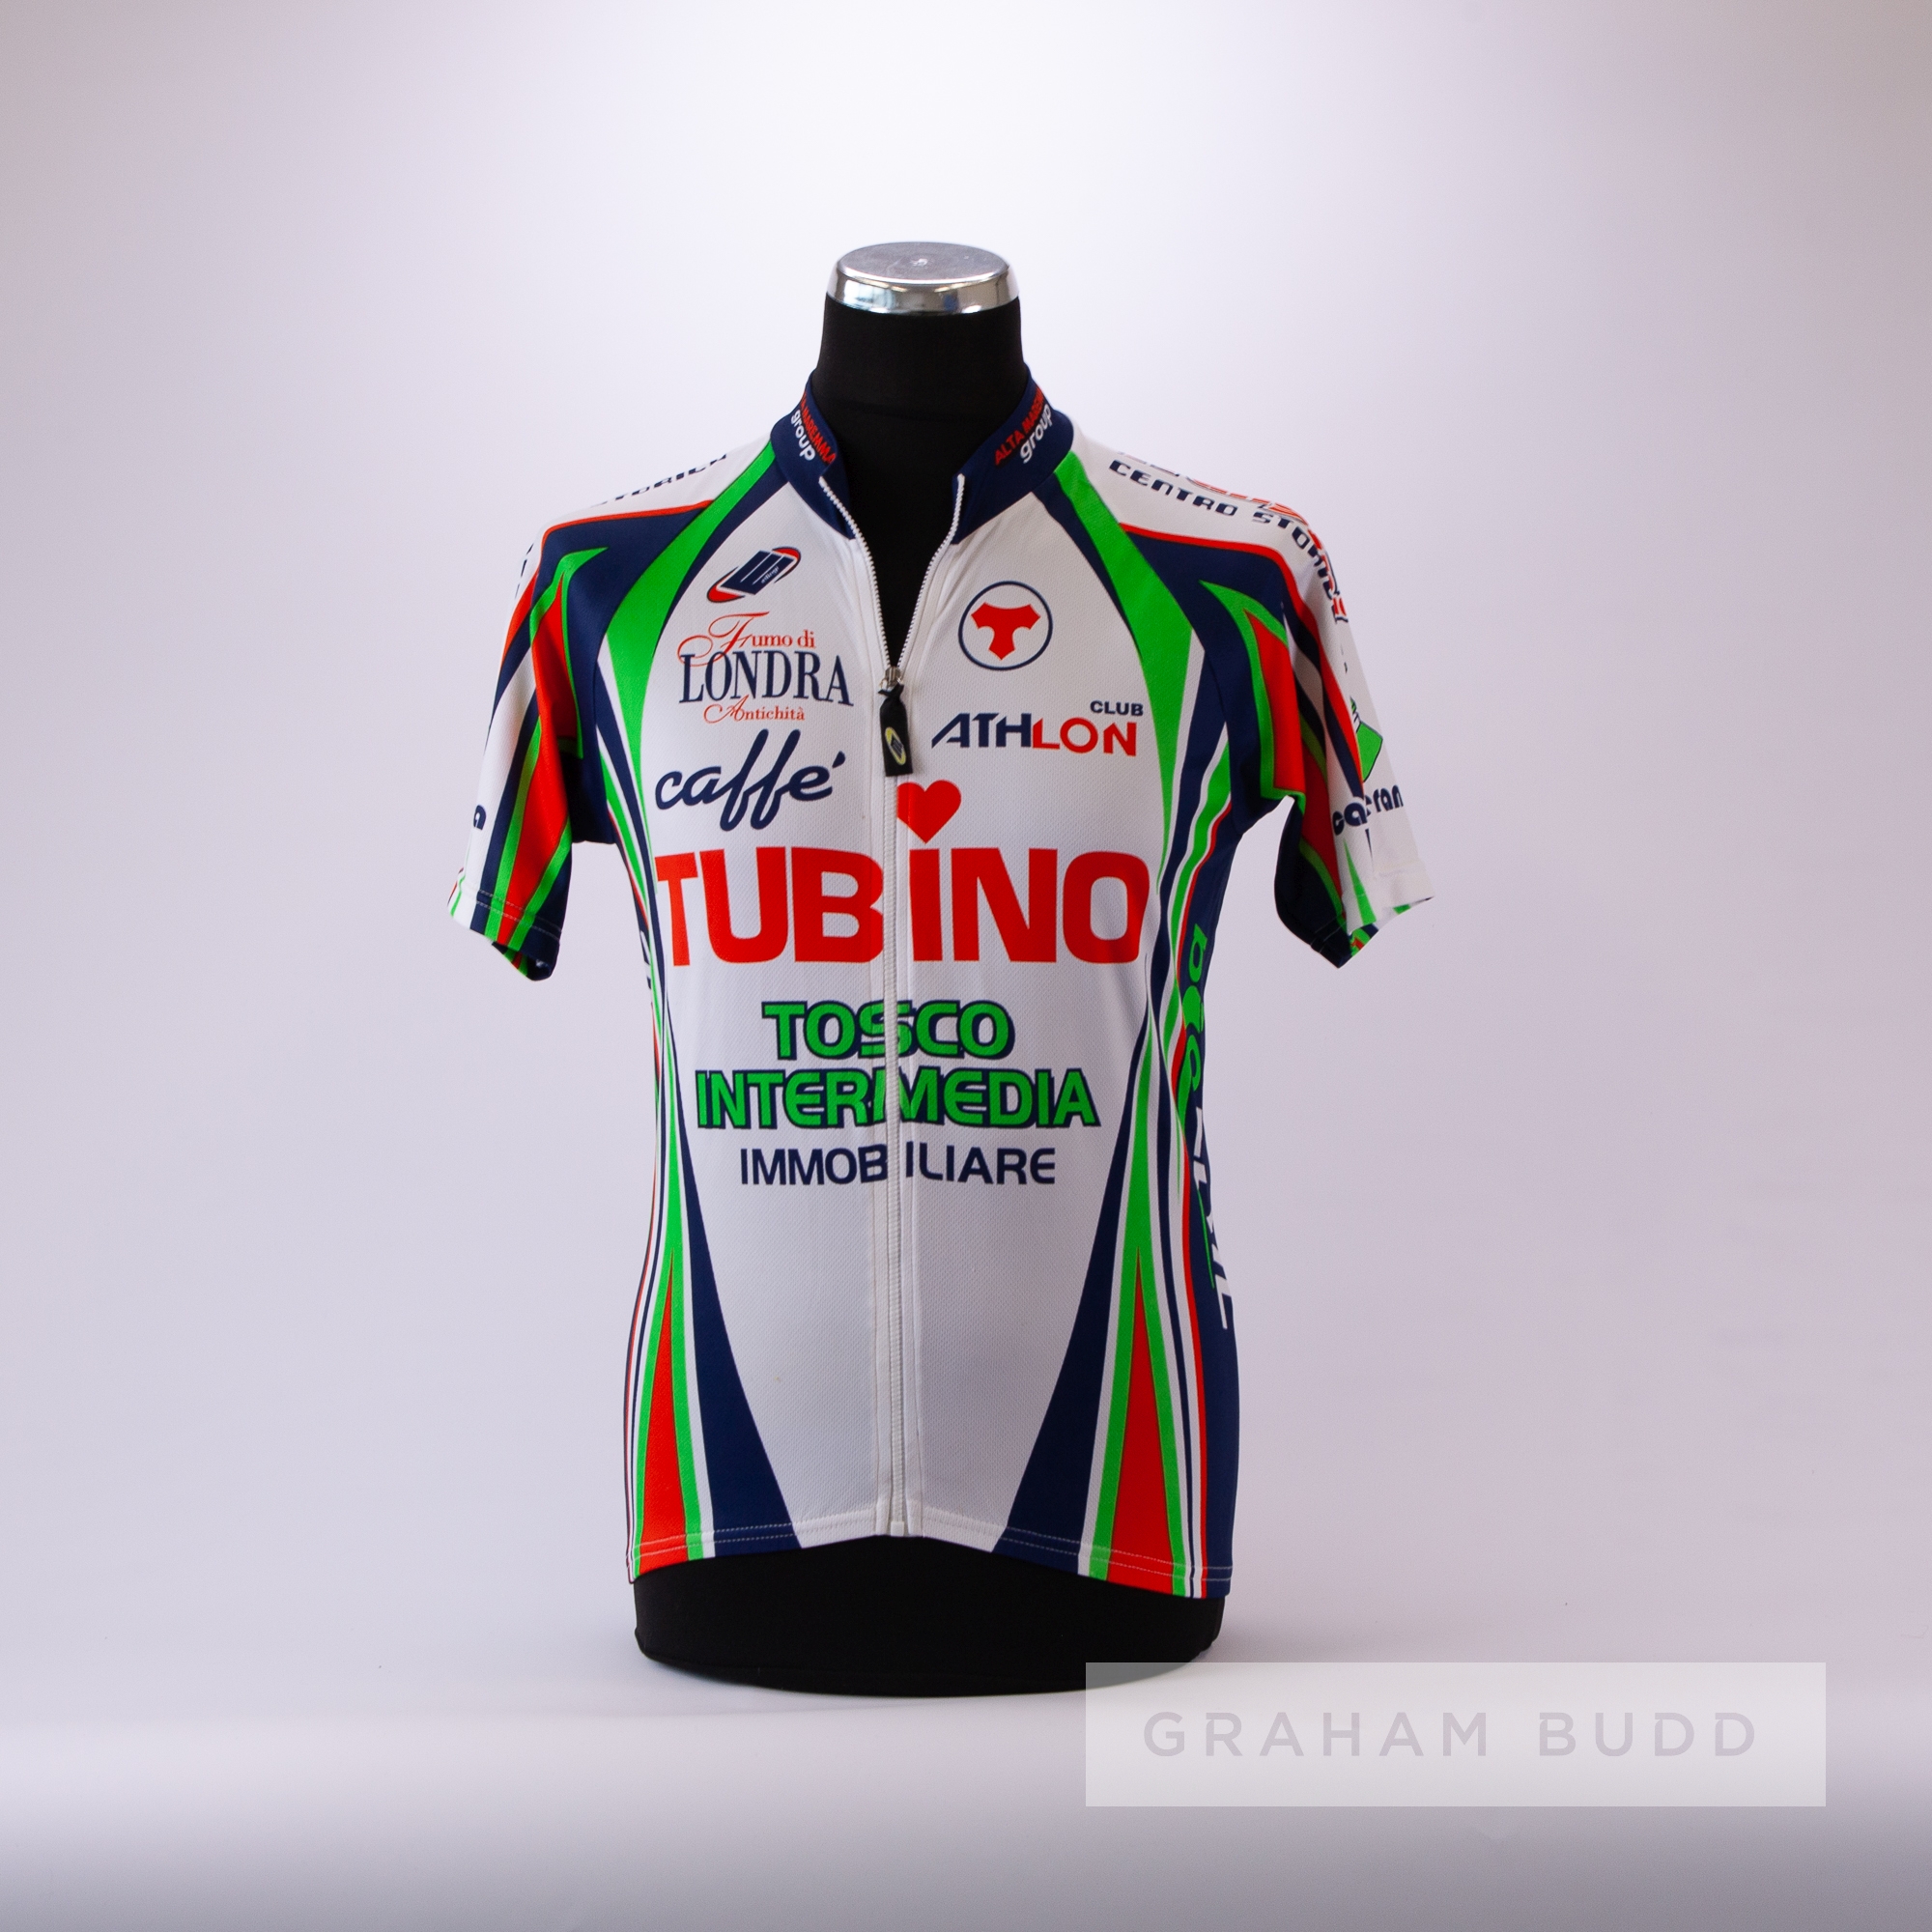 1995 white, navy, green and orange Italian Tubino Tosco Cycling race jersey, scarce, polyester - Image 3 of 4